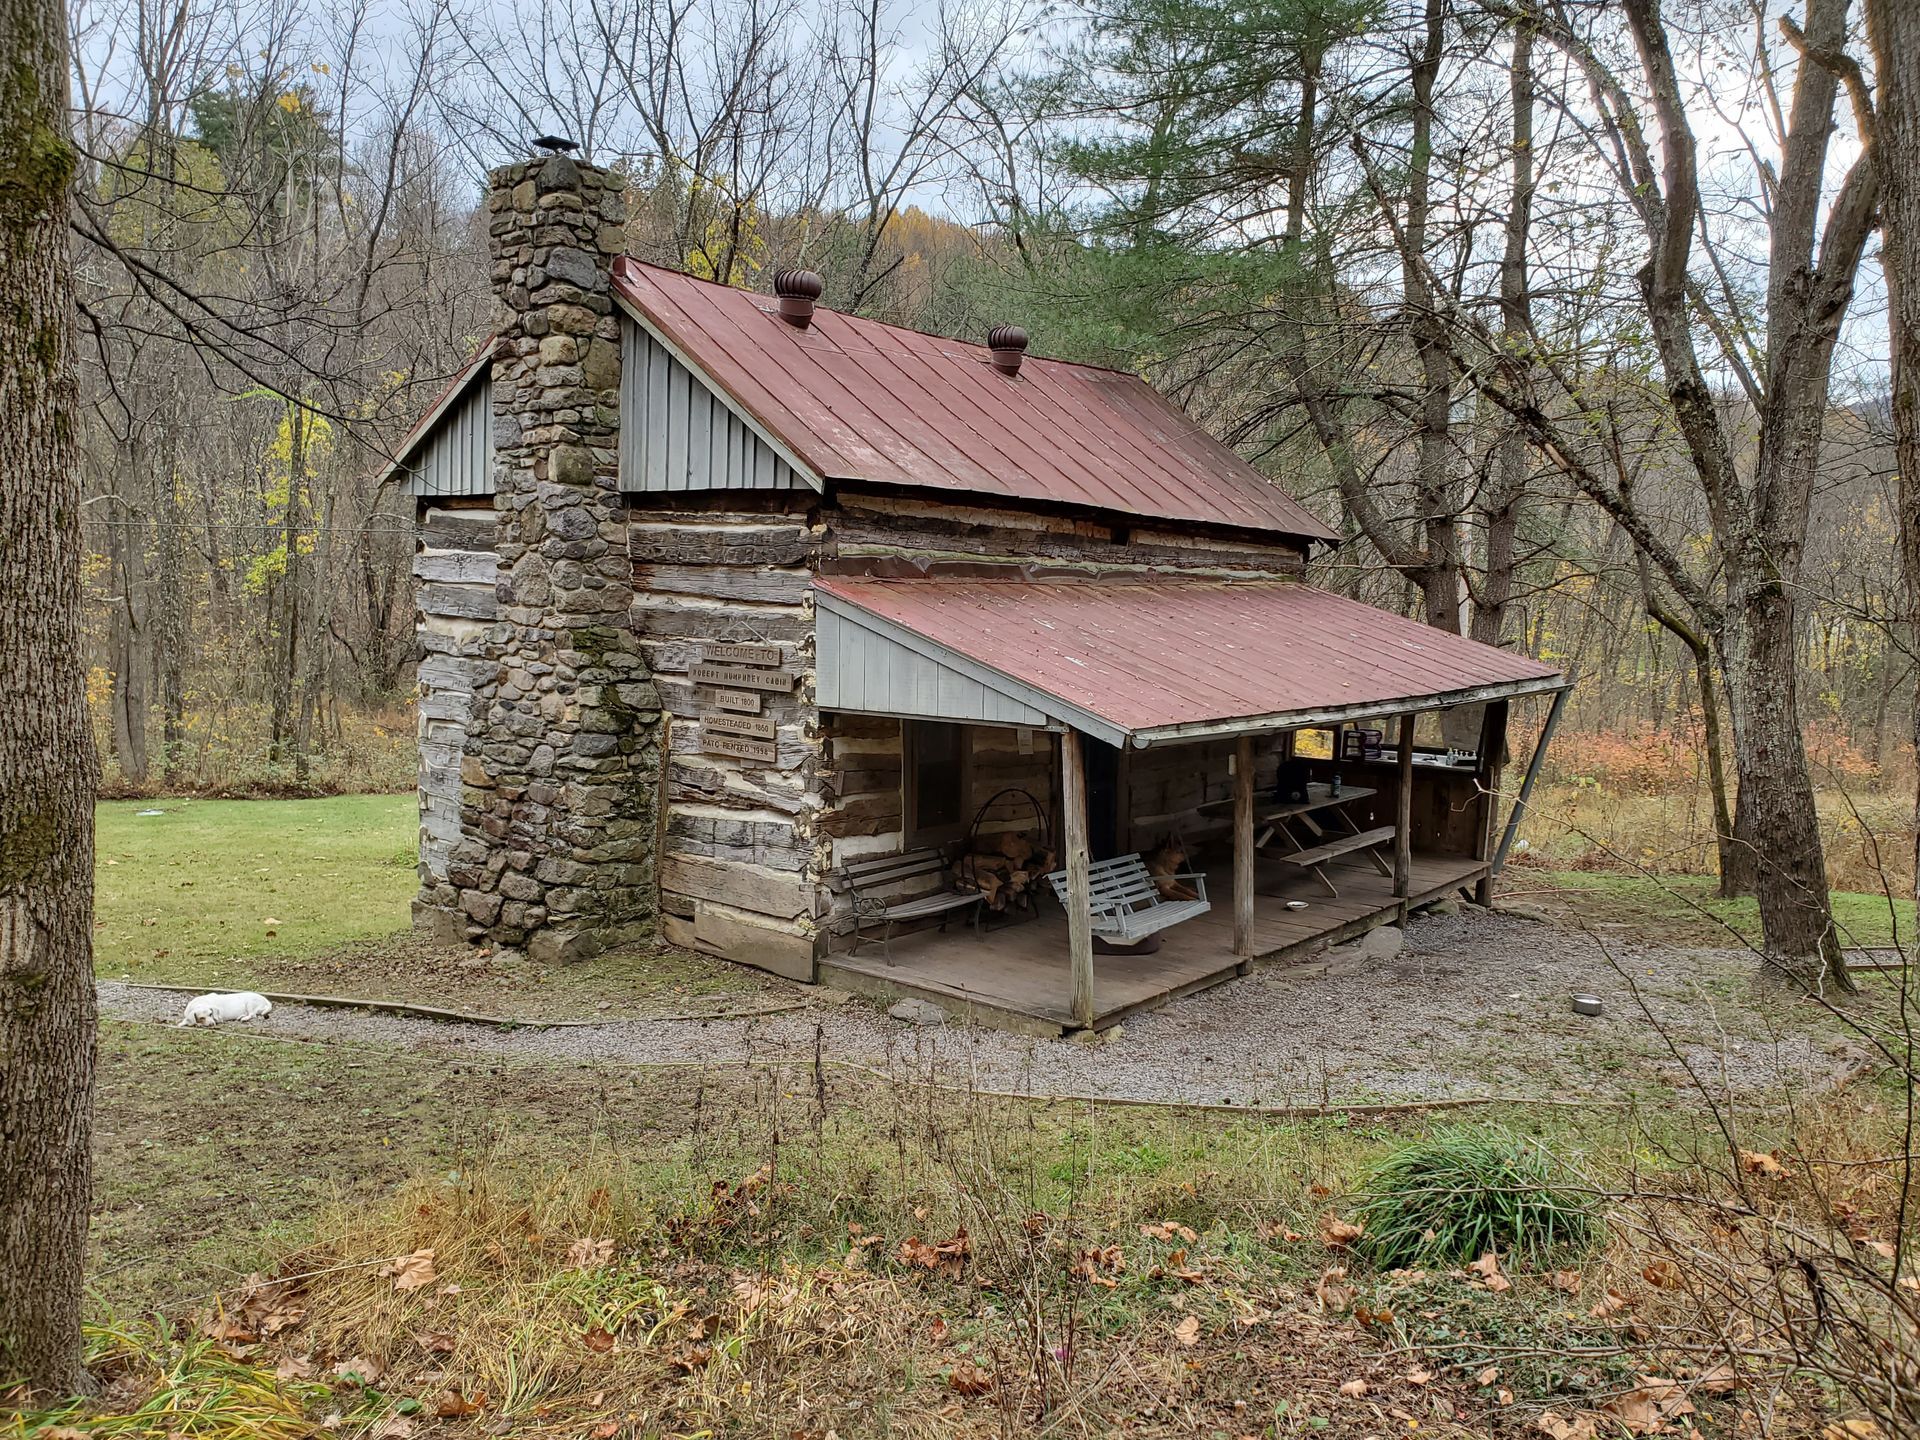 The front view of Robert Humphrey's cabin shows a wooden porch with hanging benches and a wooden picnic table.